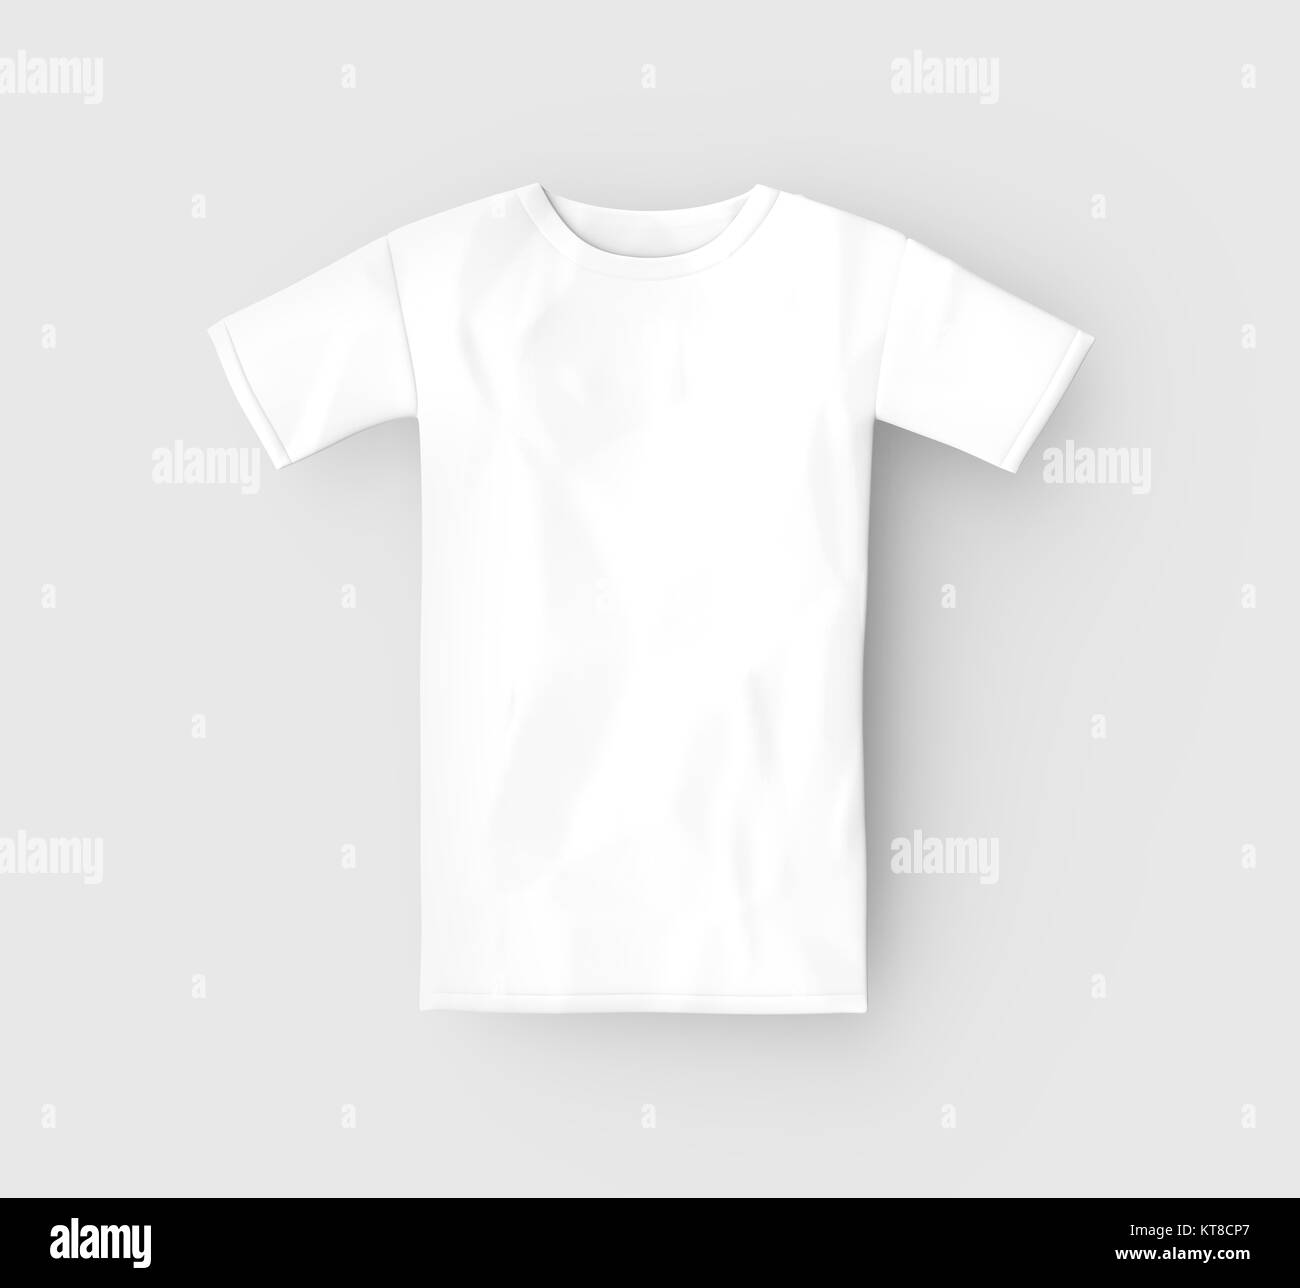 T shirt mockup, blank white unisex cloth template isolated on light gray background, 3d render Stock Photo